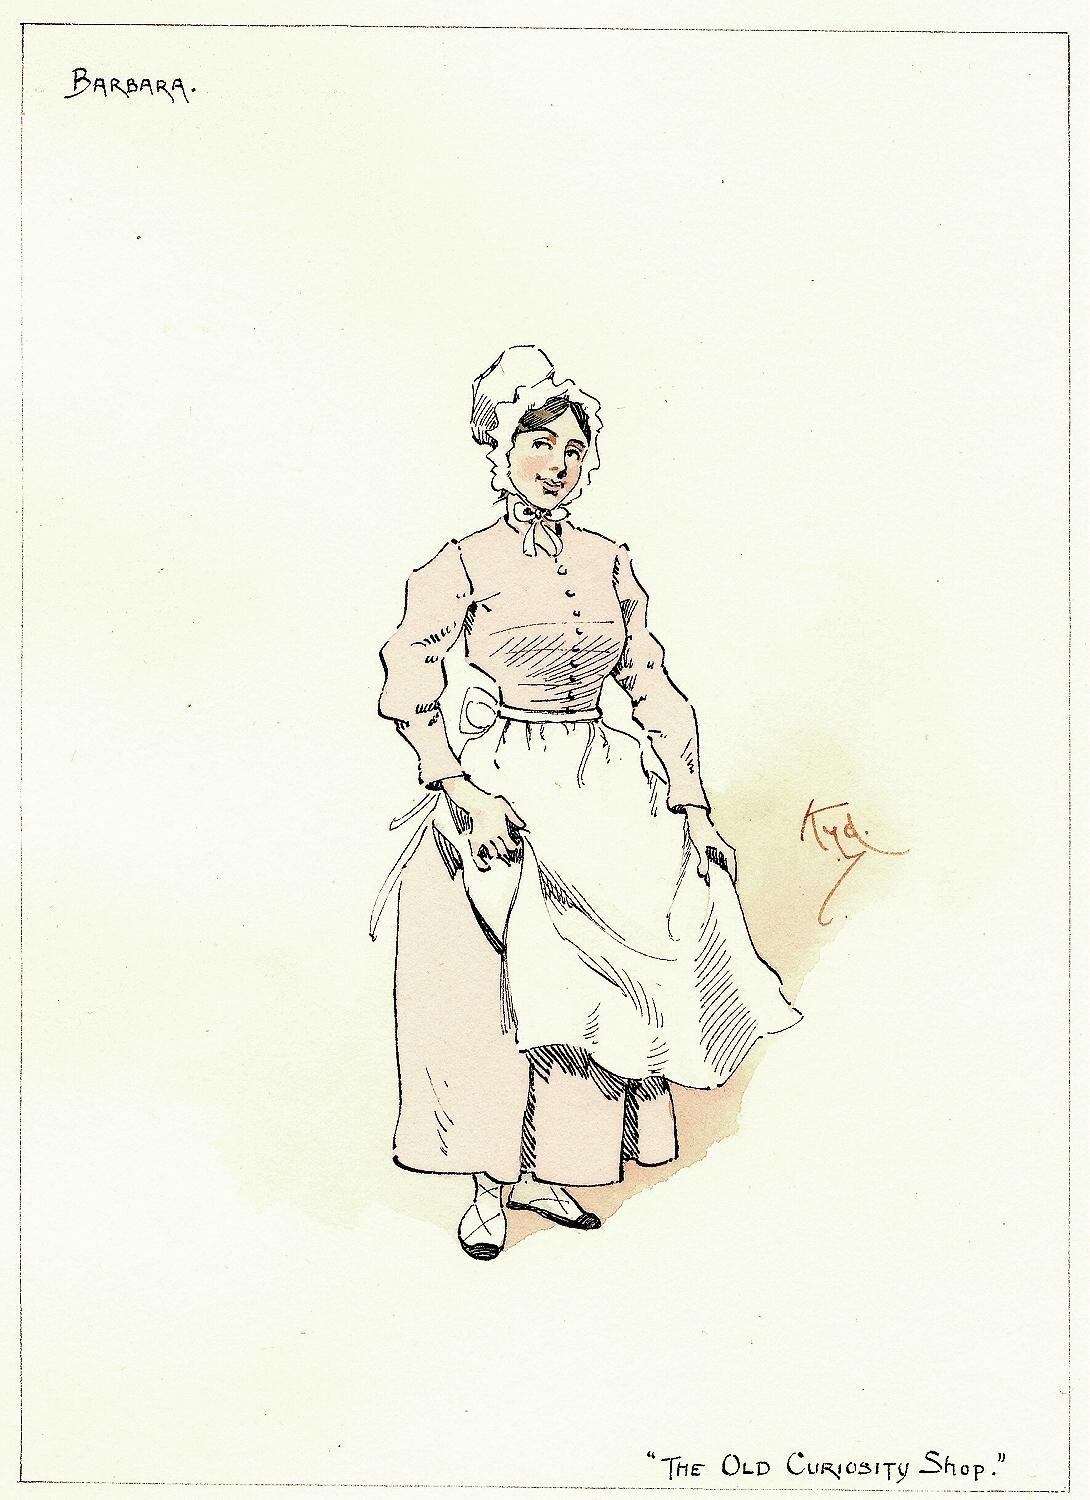 AUTHOR: CLARKE, Joseph Clayton (KYD) (Charles Dickens). 

TITLE: Barbara (from The Old Curiosity Shop)

PUBLISHER: England, [c. 1920]

DESCRIPTION: ORIGINAL INK AND WATERCOLOR SKETCH. 1 leaf, on paper, image 5-15/16